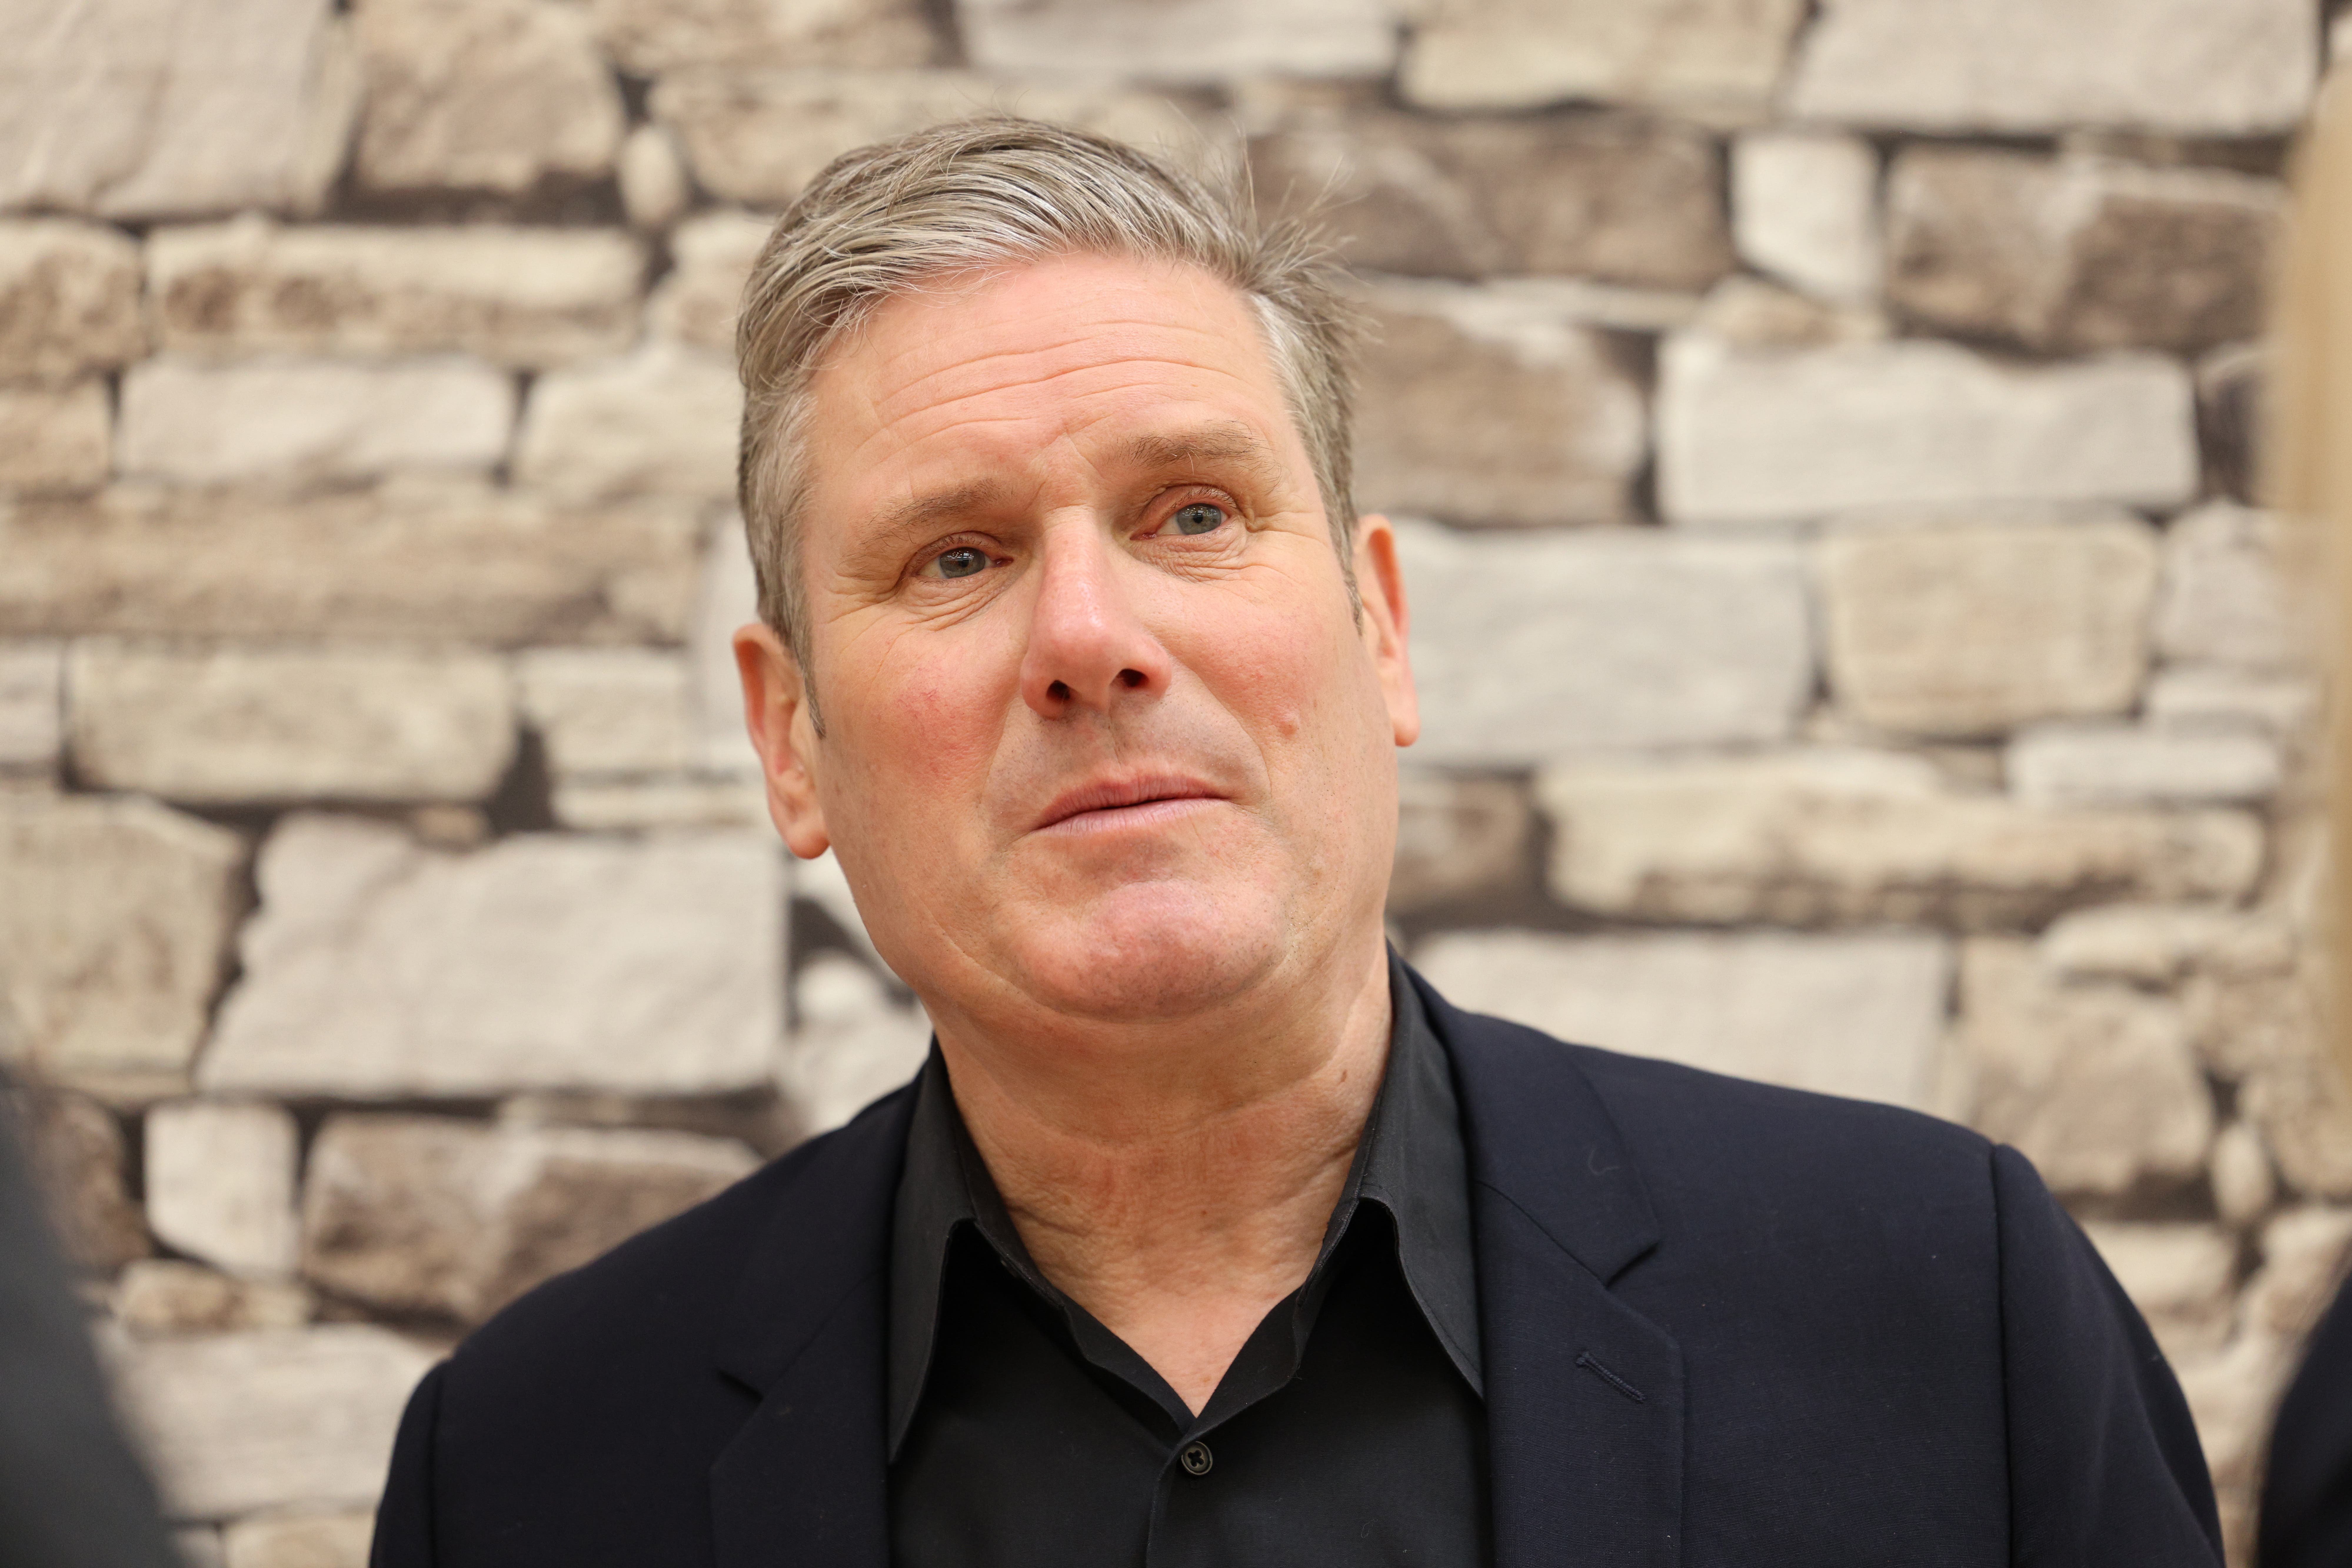 Neither Blairite nor Corbynista, Keir Starmer is not an easy politician to label